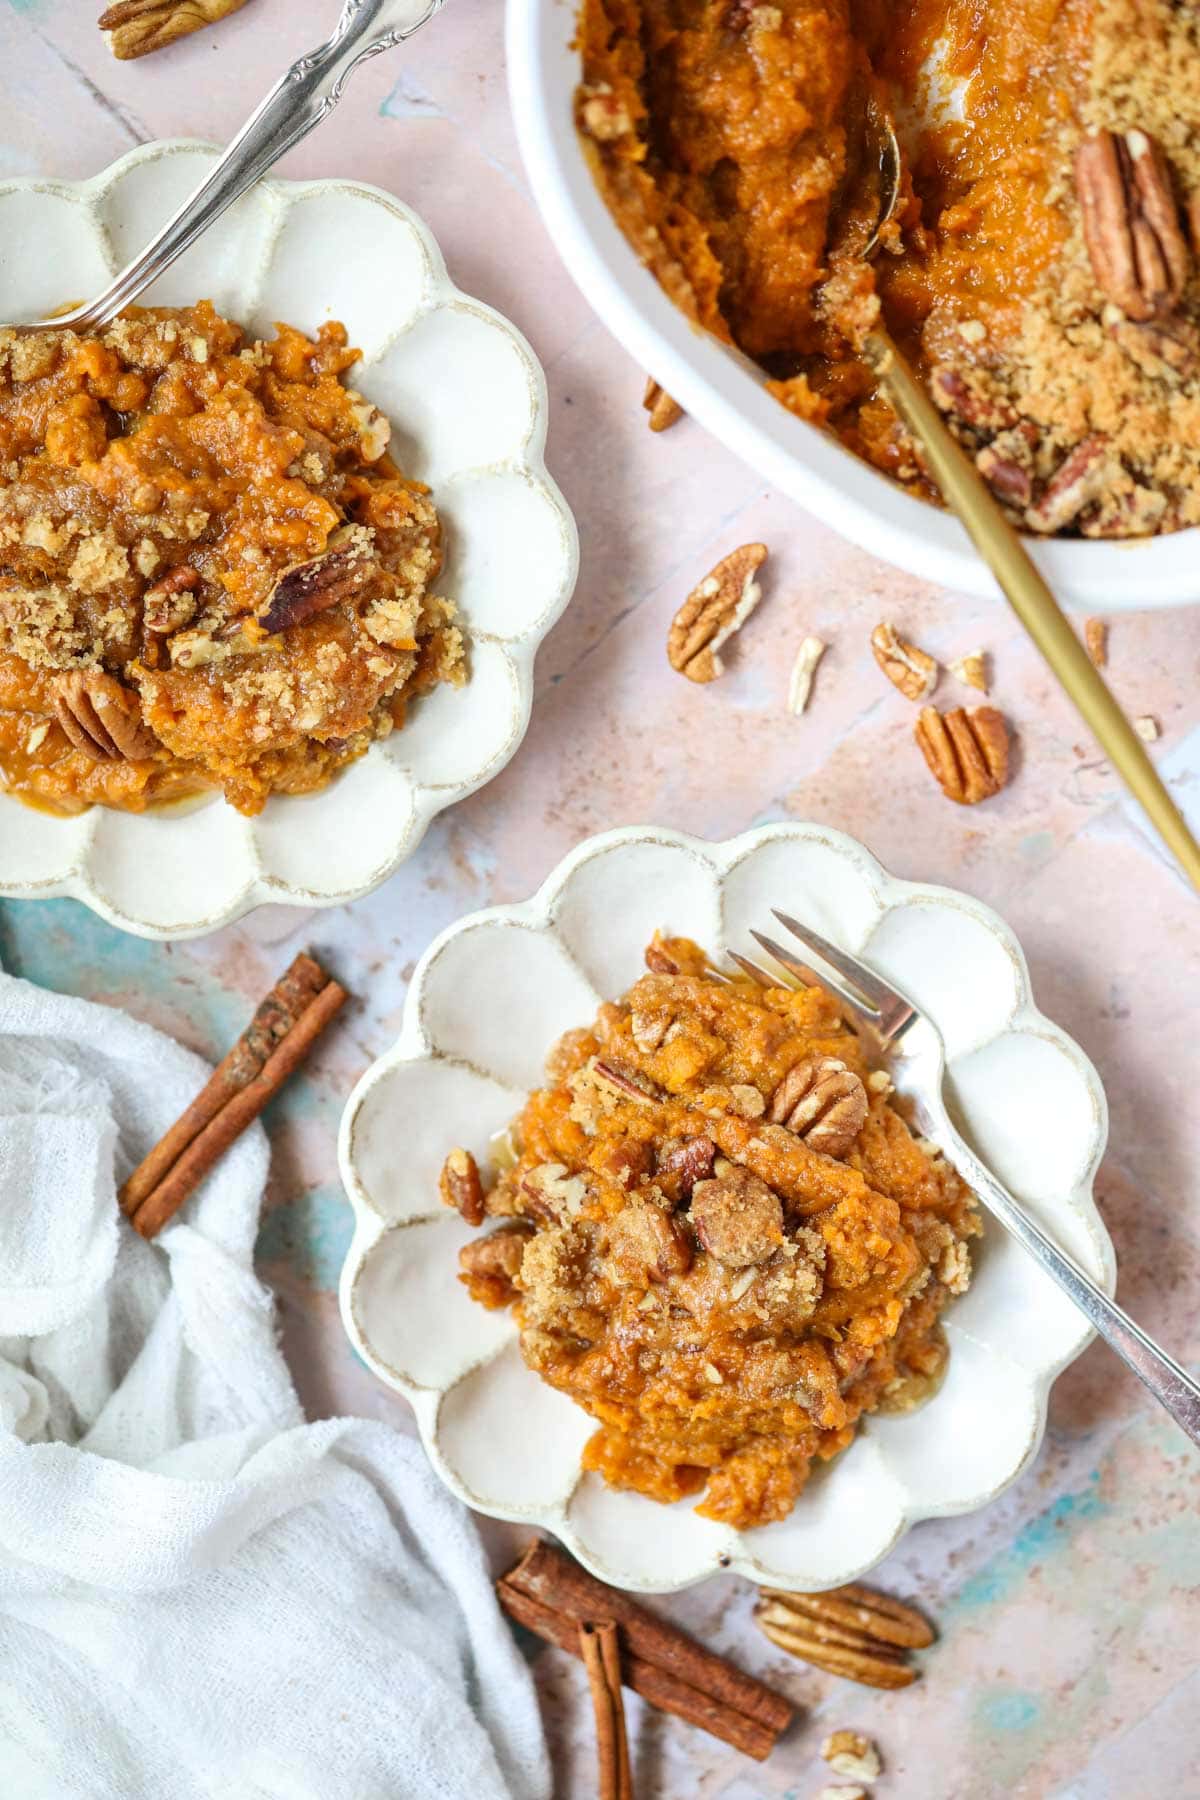 Servings of southern sweet potato casserole on white plates sitting on top of a tile surface.